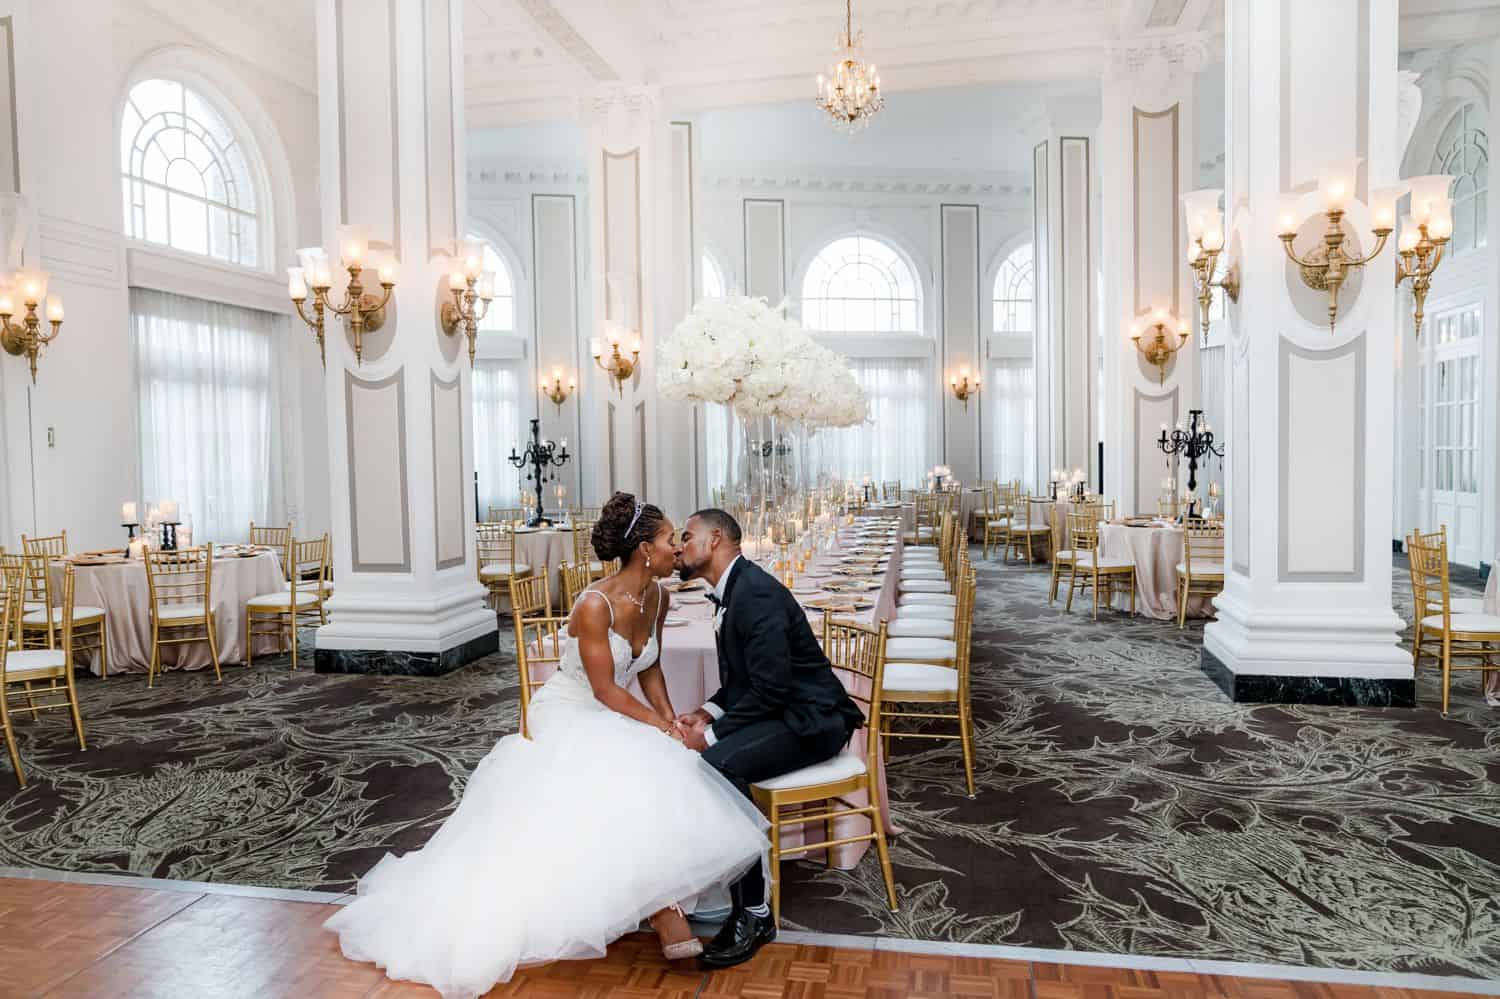 A bride in a white wedding gown kissed a groom in a black tuxedo. Both are seated in the front row of a ballroom full of chandeliers.